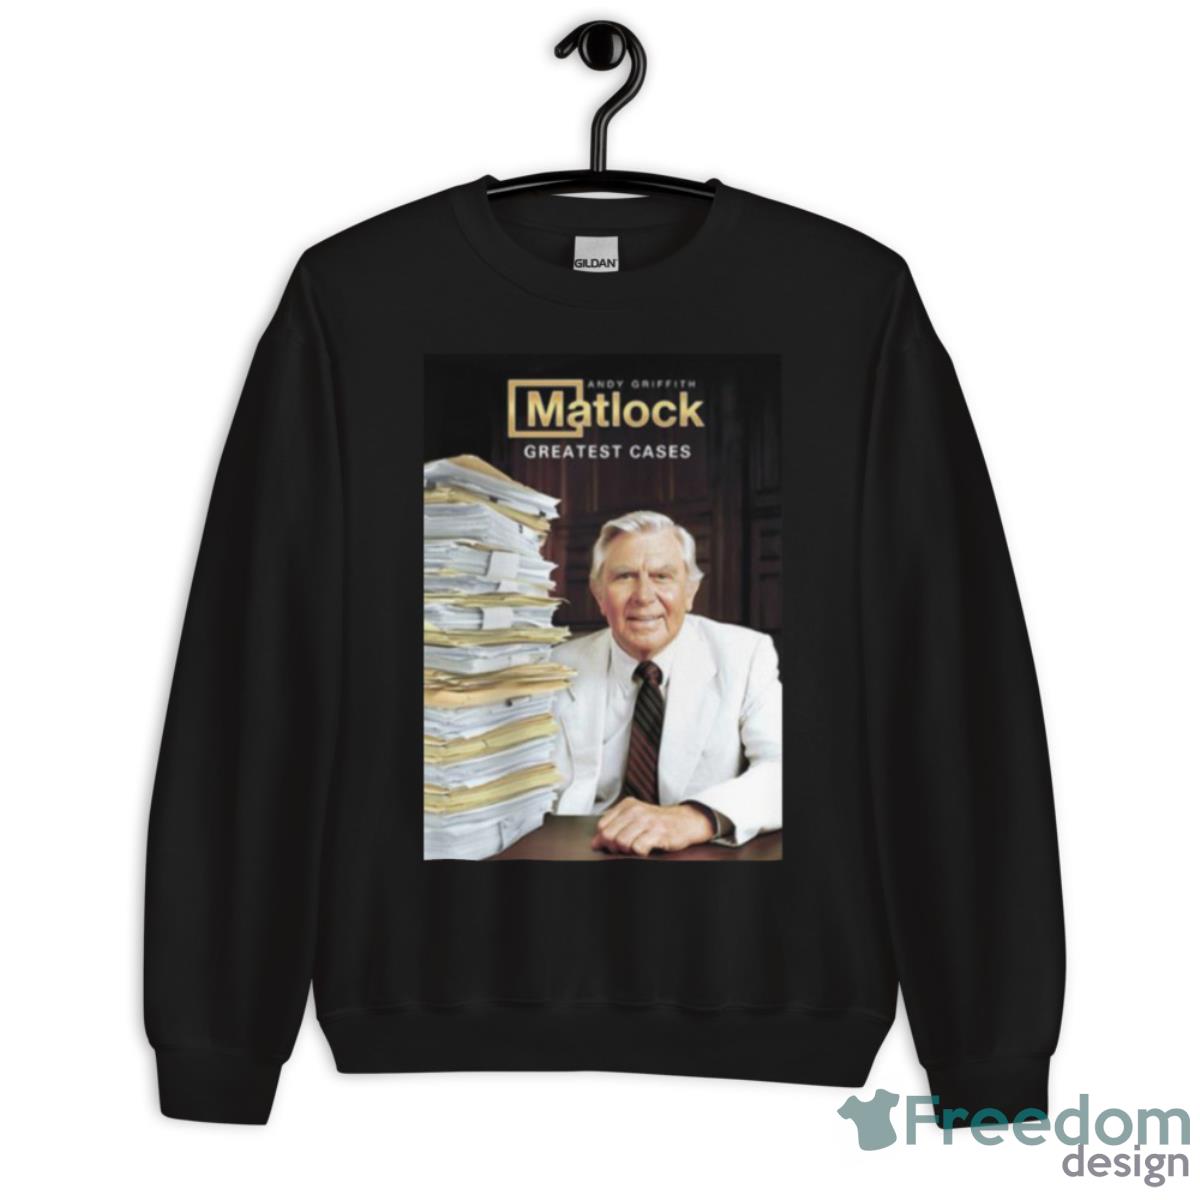 A Love Of Art Monologue Andy Griffith Ben Matlock Greatest Cases Shirt